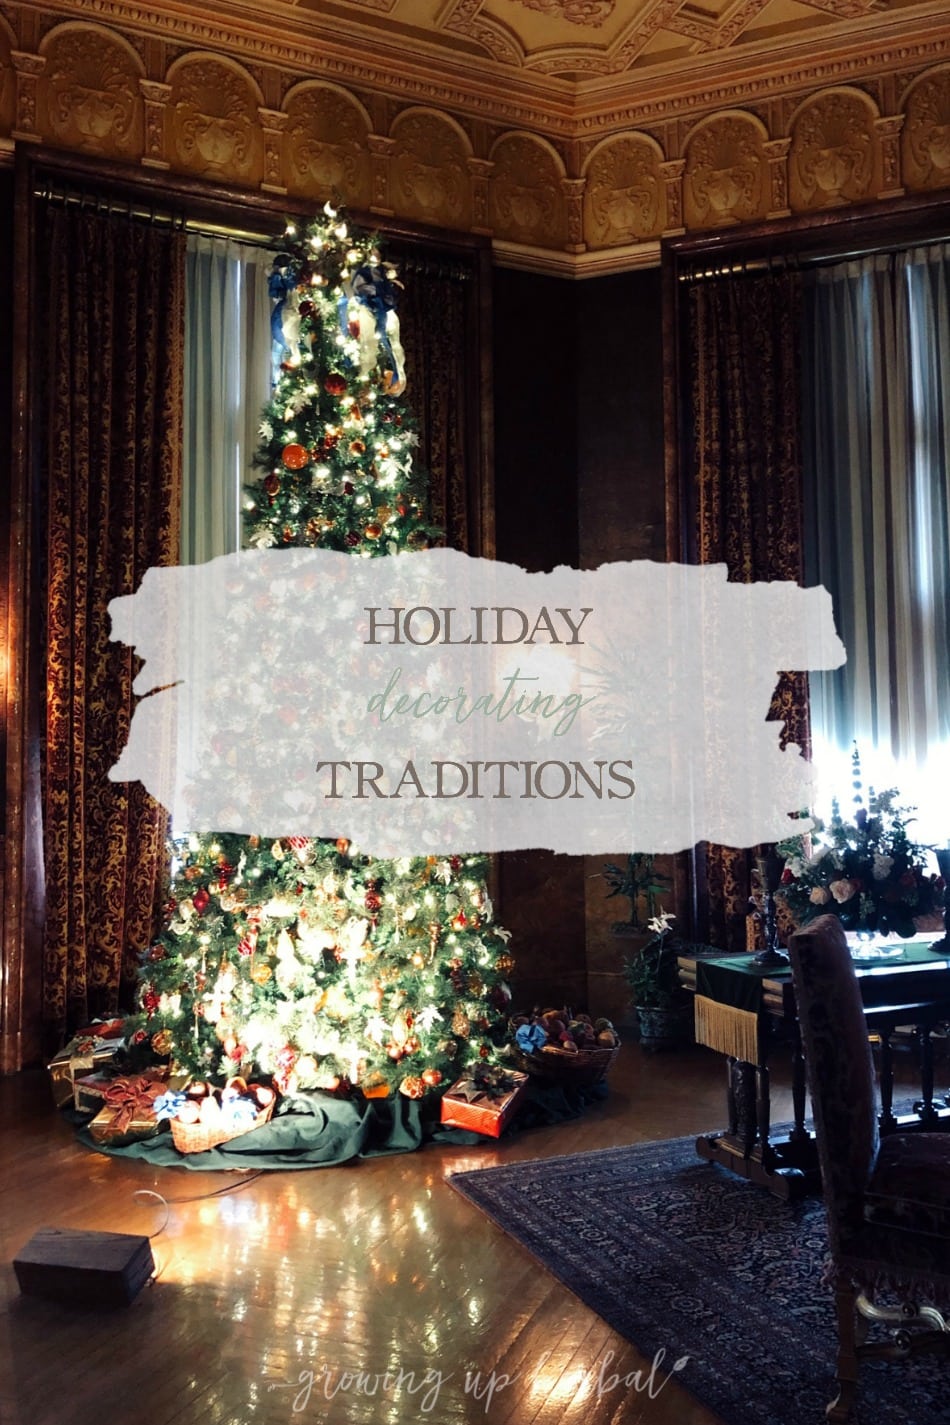 Holiday Decorating Traditions | Growing Up Herbal | I’m one of those people that refuses to decorate for Christmas until after Thanksgiving. What about you? Do you have any holiday decorating traditions?